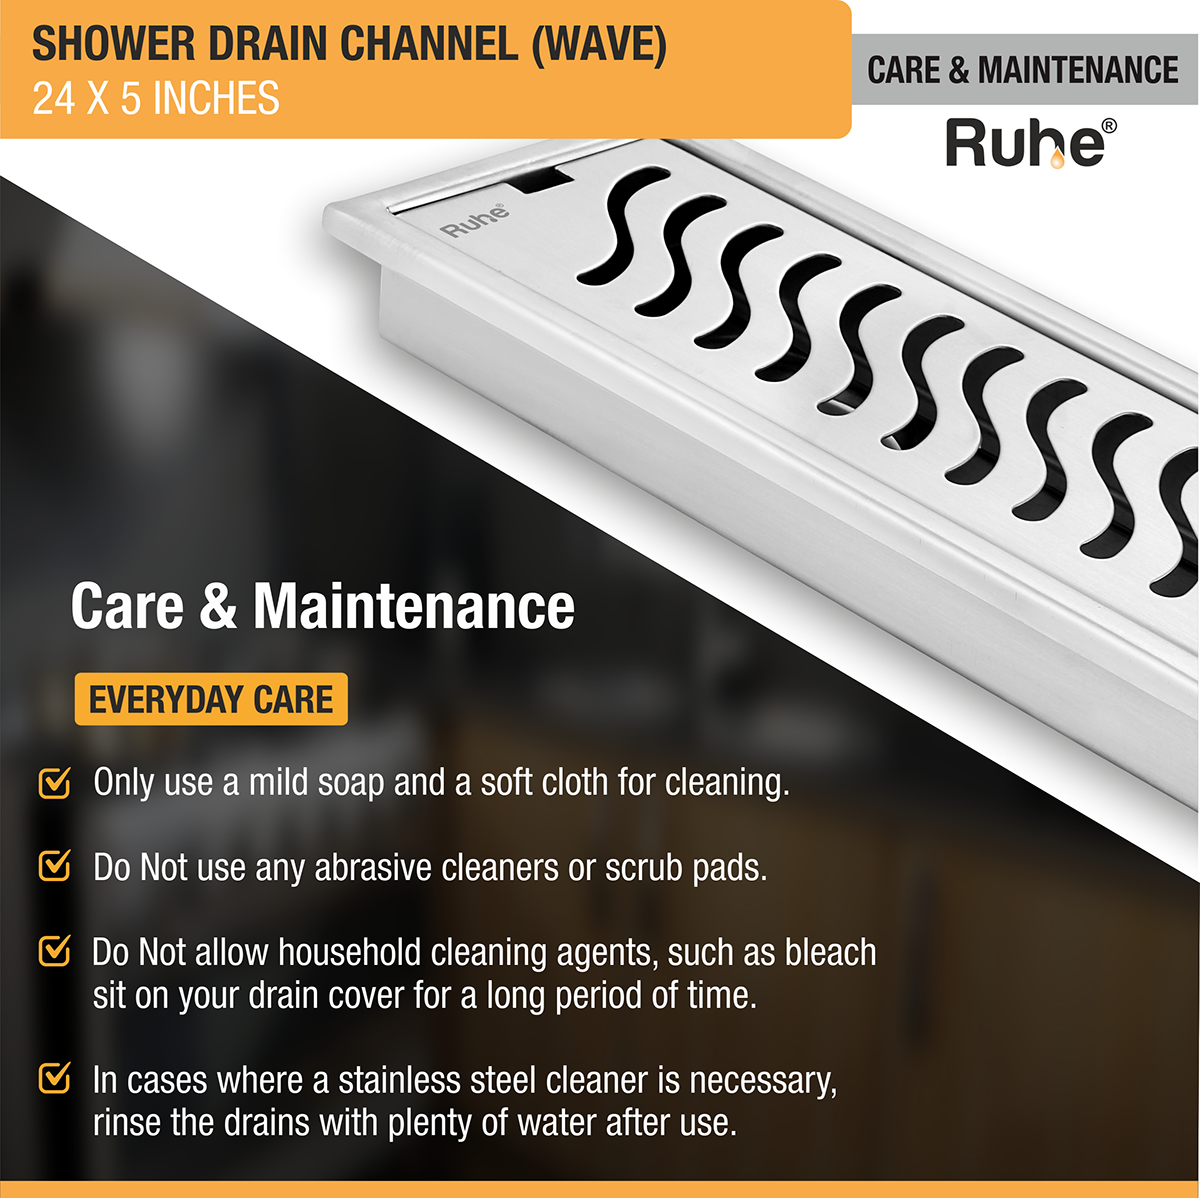 Wave Shower Drain Channel (24 X 5 Inches) with Cockroach Trap (304 Grade) care and maintenance